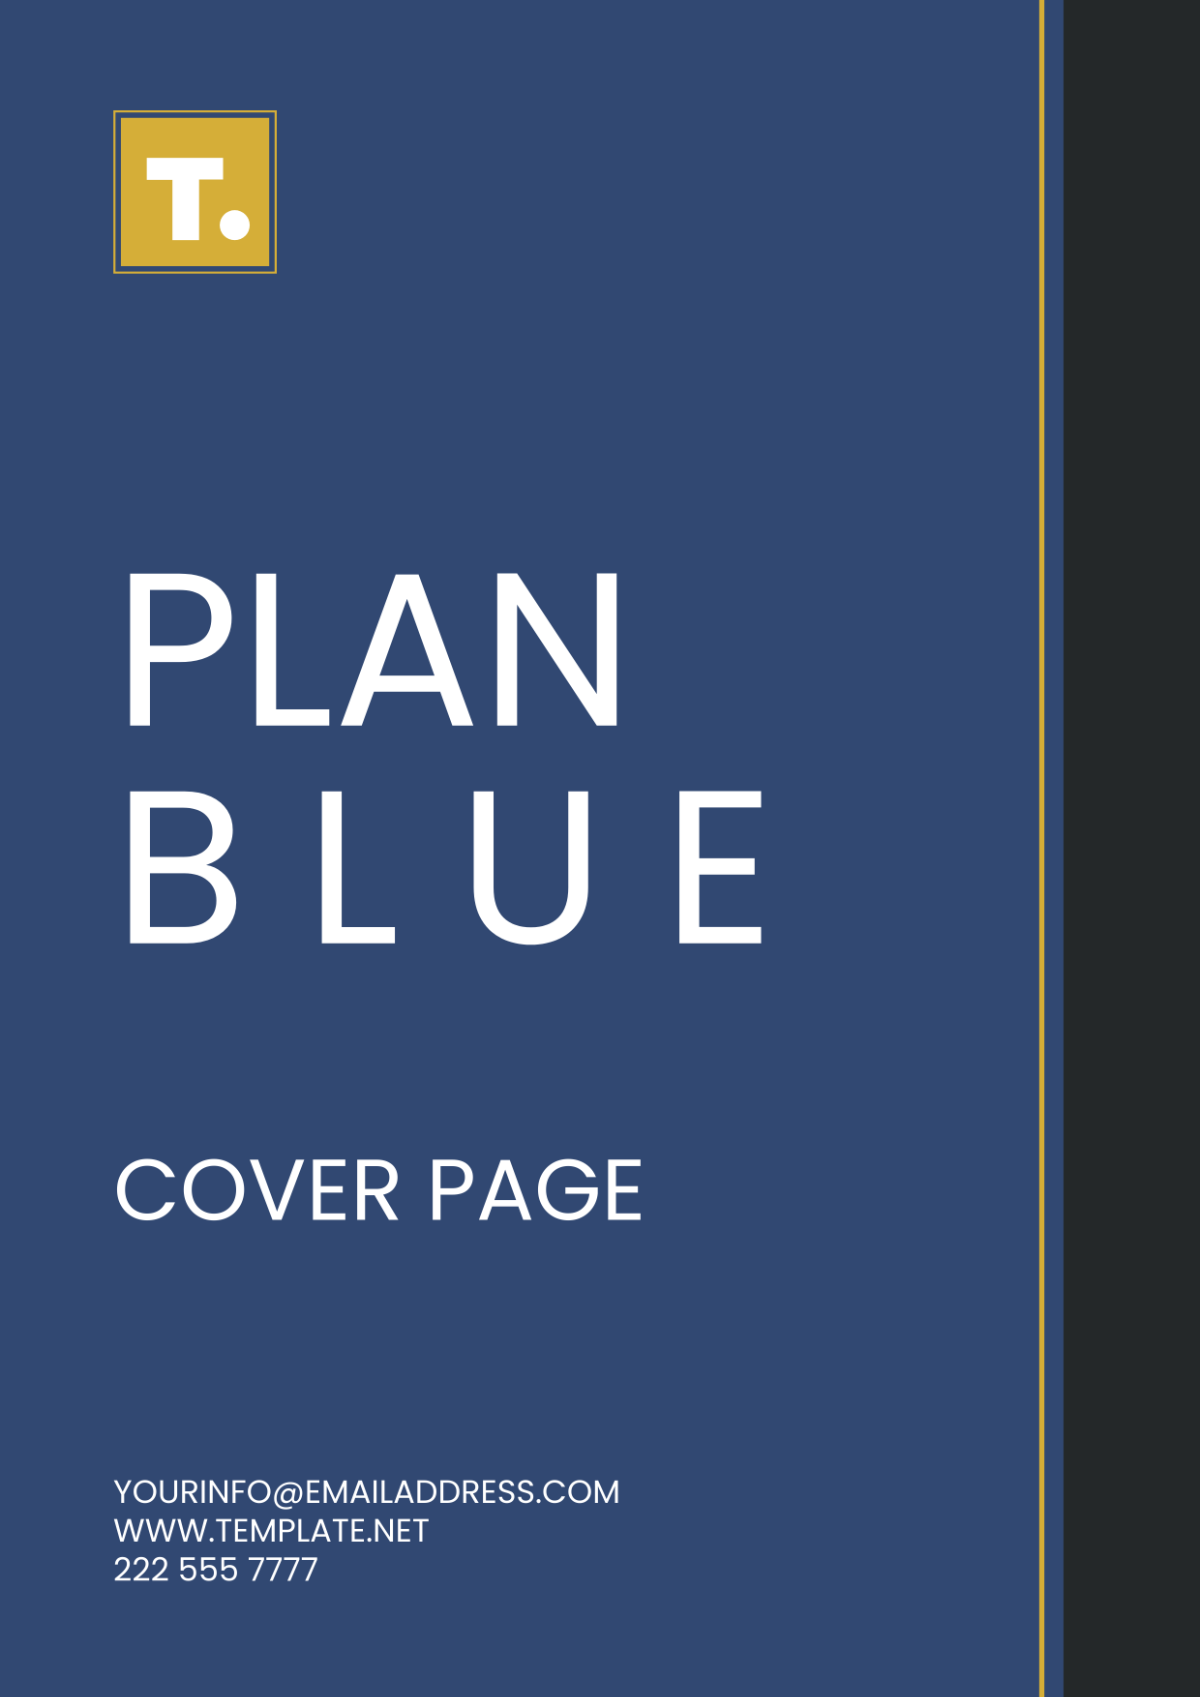 Free Plan Blue Cover Page Template